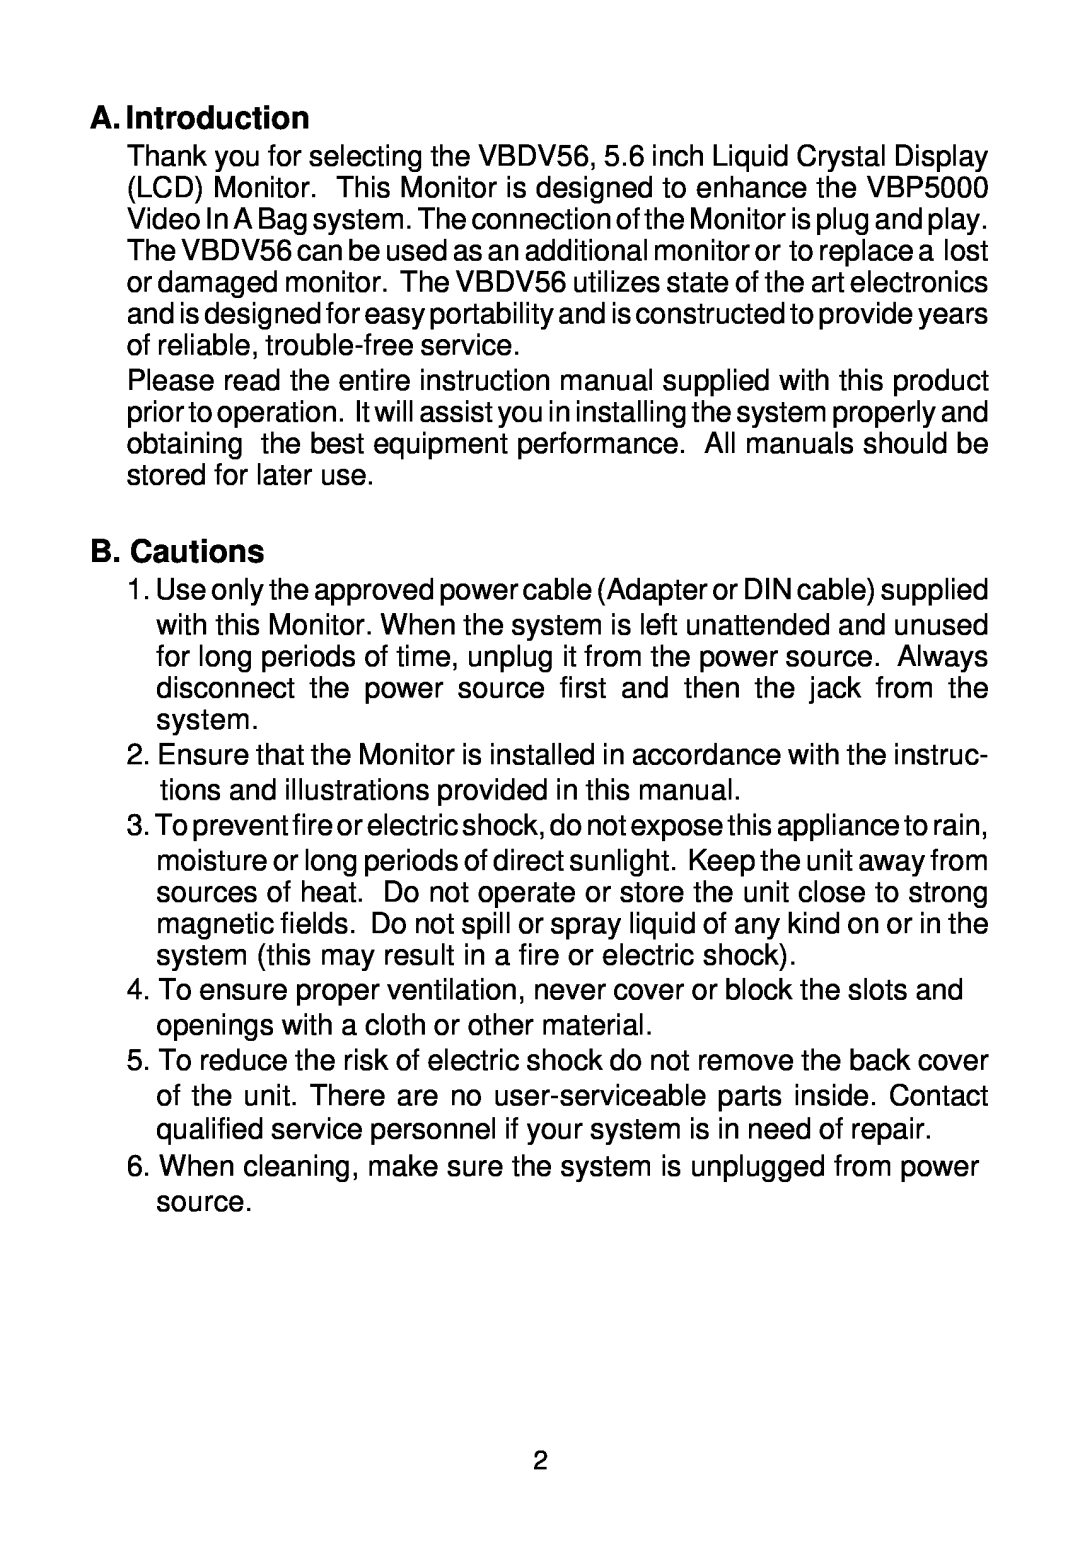 Audiovox VBDV56 owner manual A. Introduction, B. Cautions 